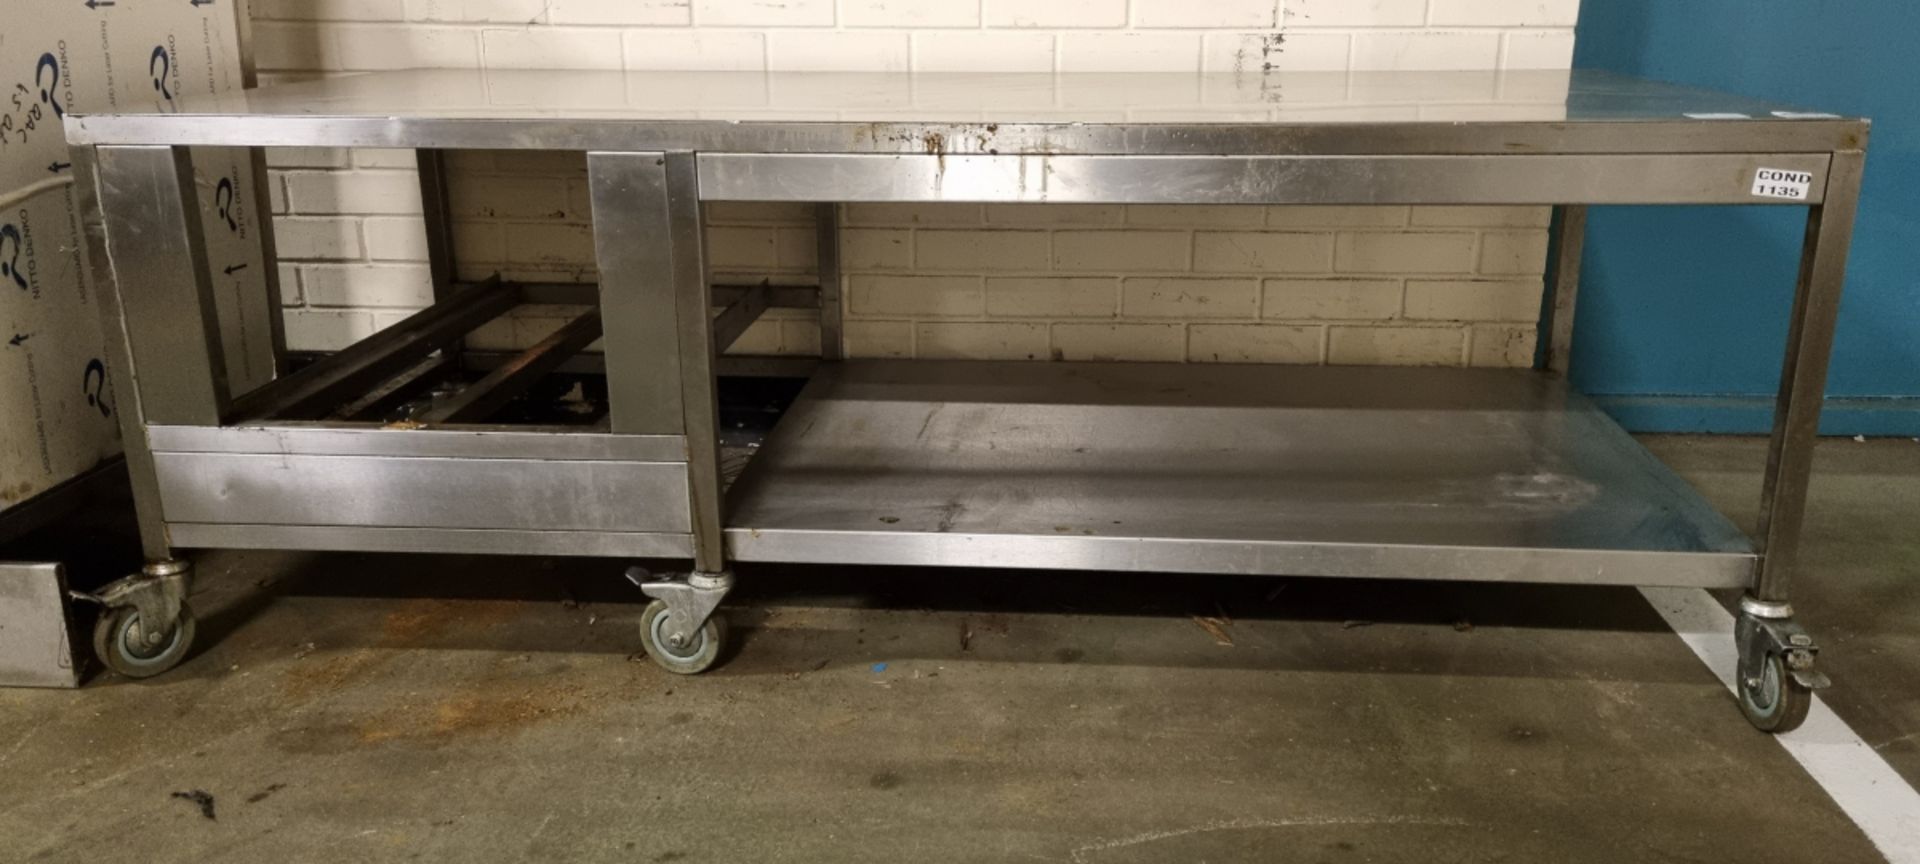 Stainless steel undercounter trolley - W 1800 x D 800 x H 650mm - Image 2 of 3